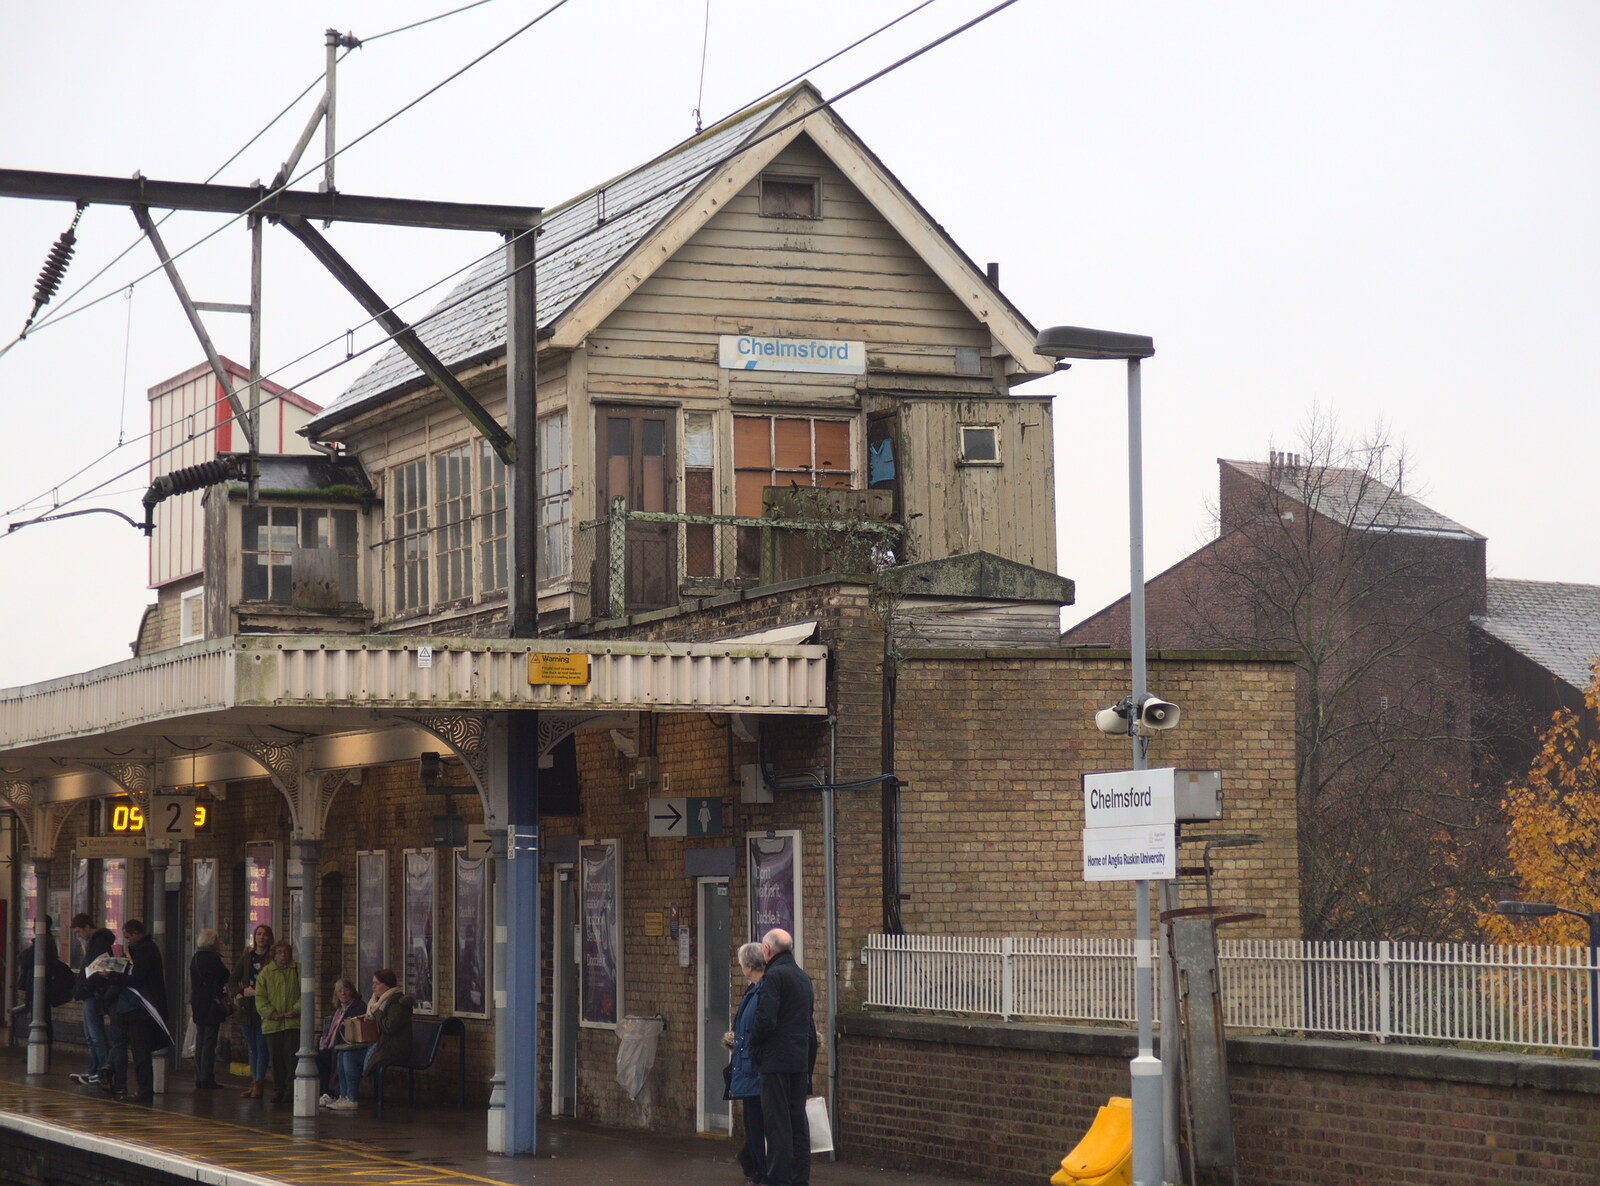 An old Network Southeast signal box at Chelmsford from The Lorry-Eating Pavement of Diss, Norfolk - 3rd December